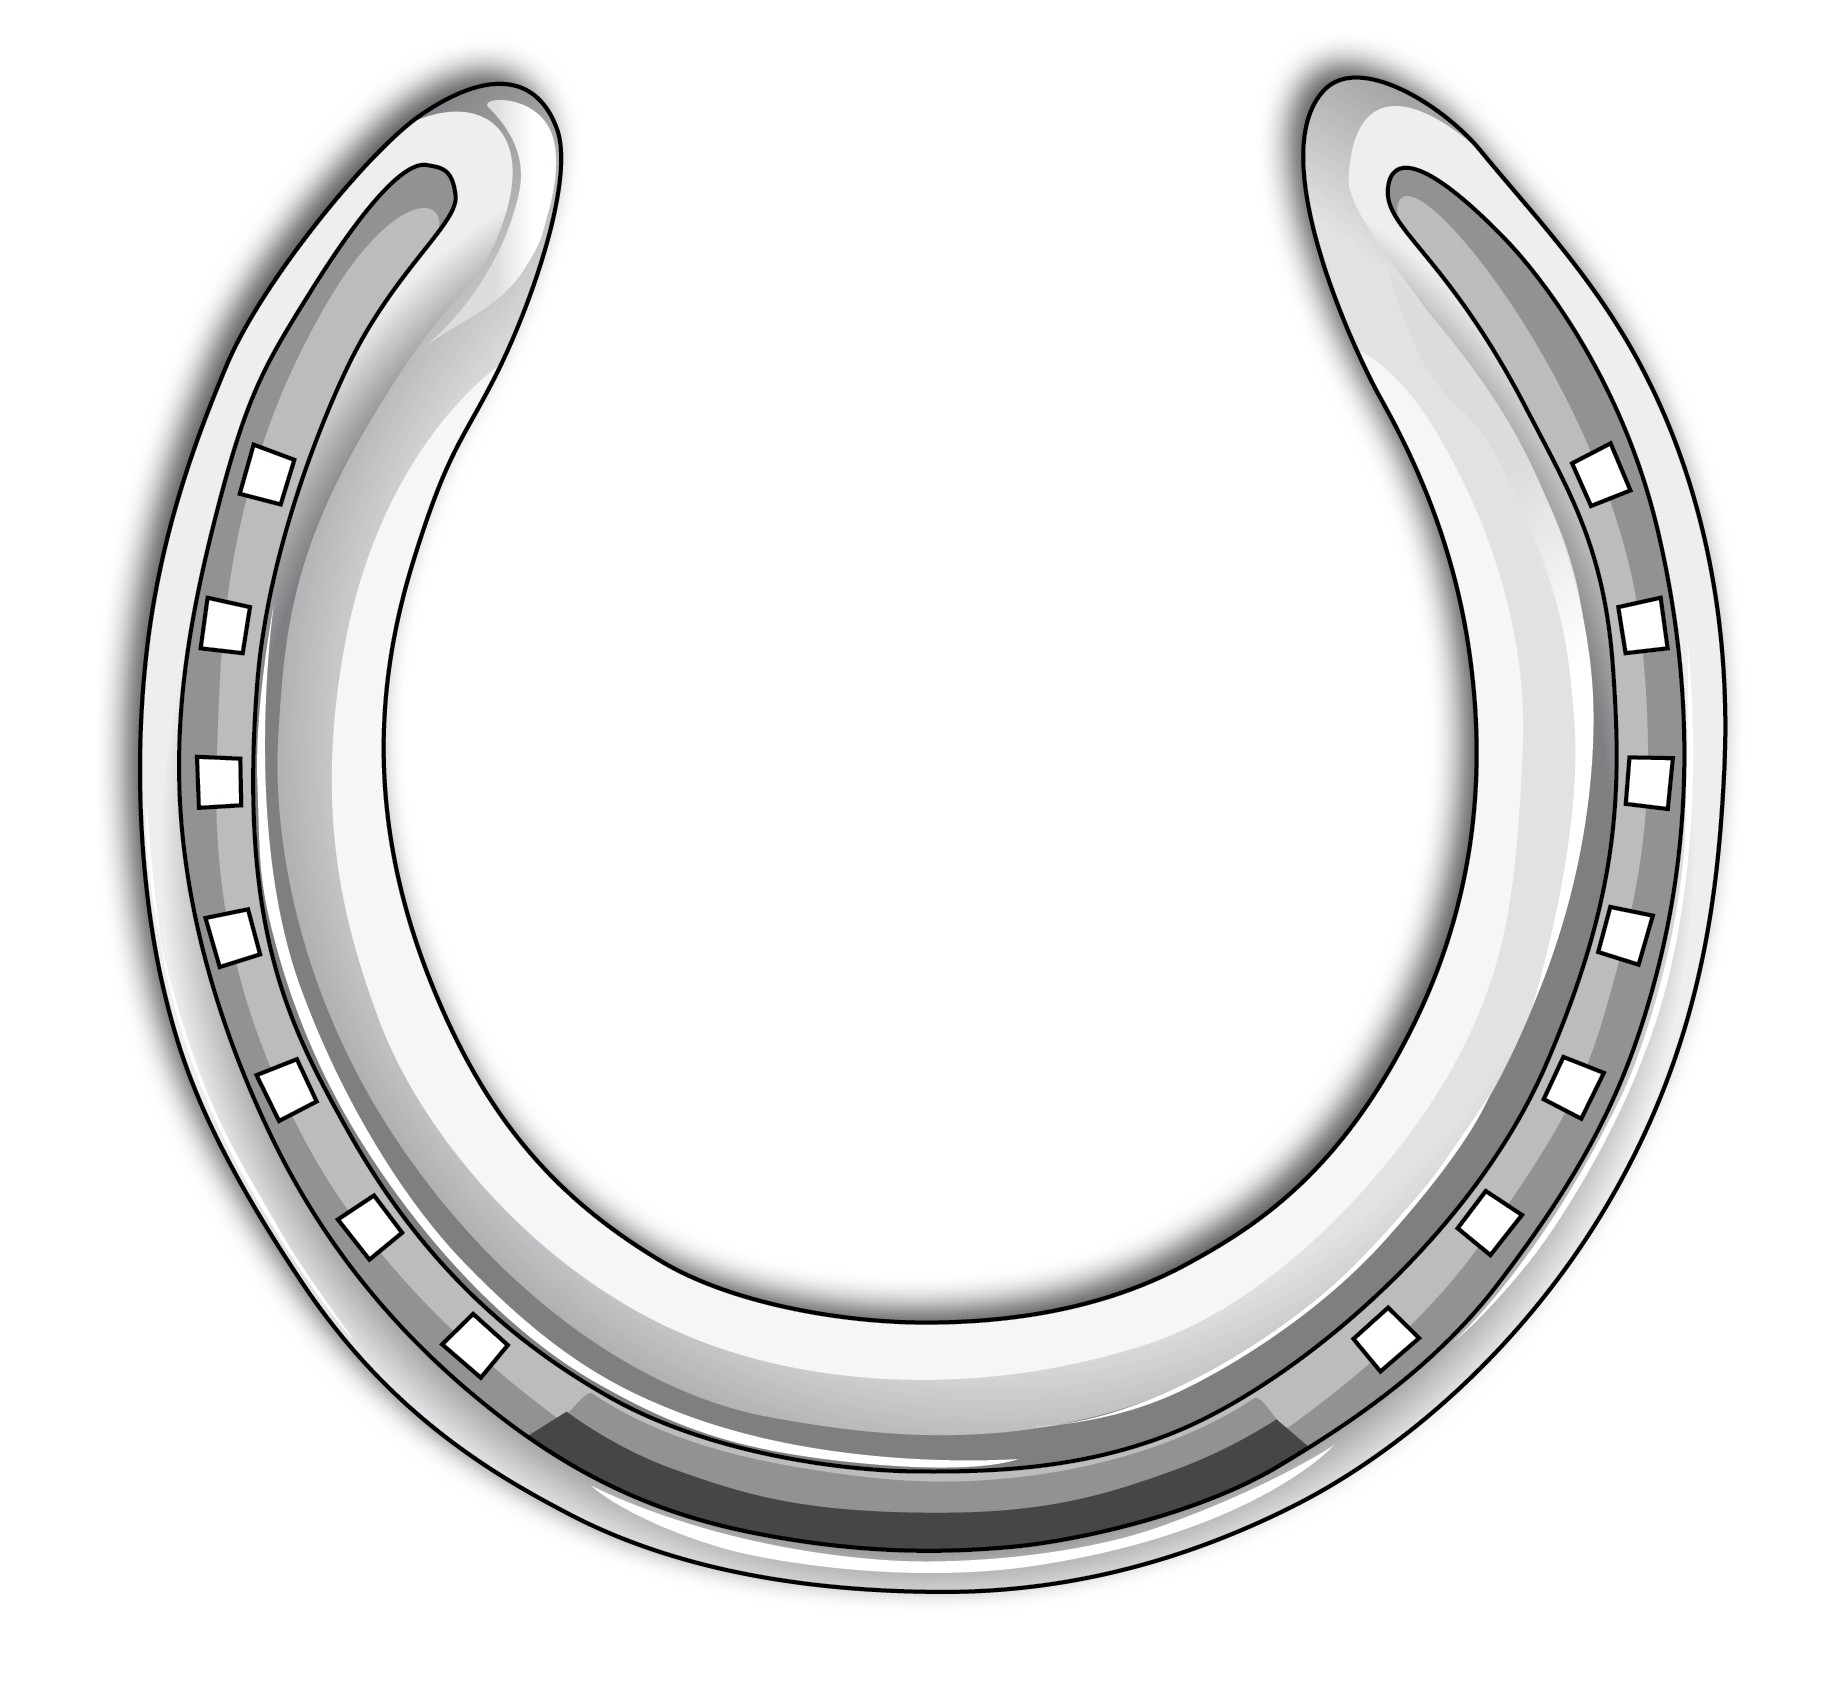 Trends For > Horseshoe Drawing